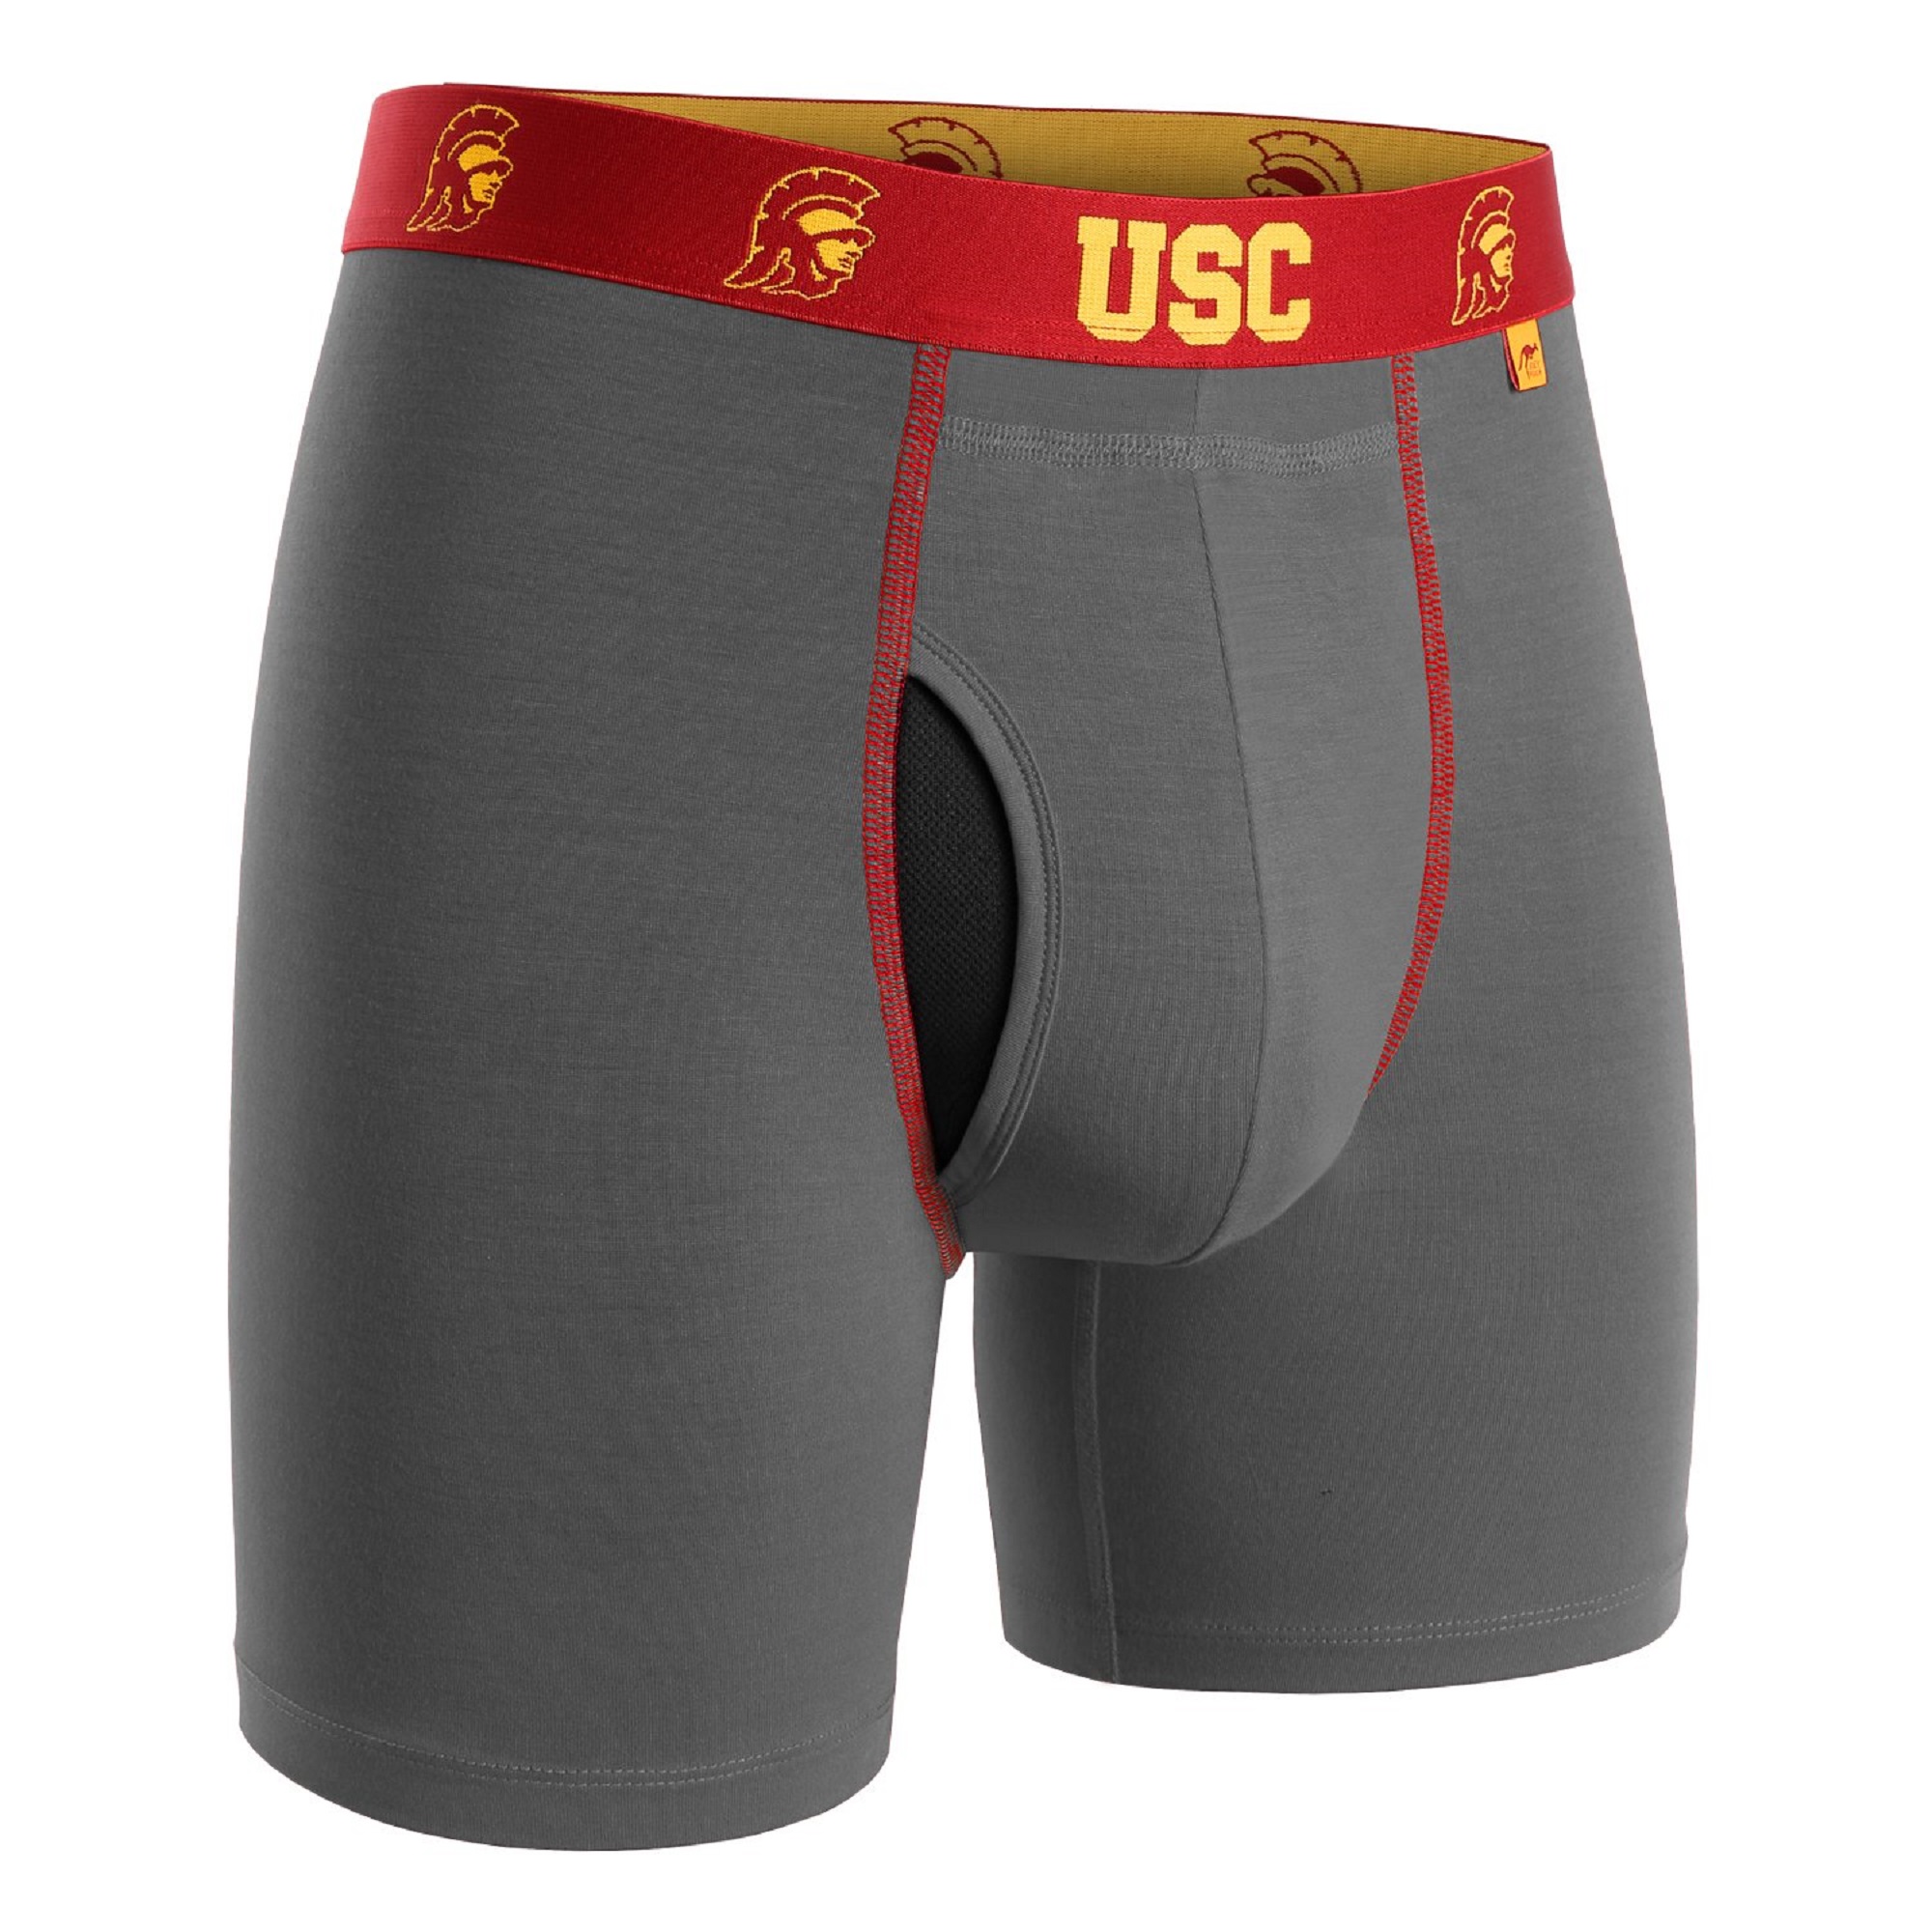 2UNDR NCAA Team Colors Men's Swing Shift Boxers (SoCal Grey, Small) - image 1 of 5